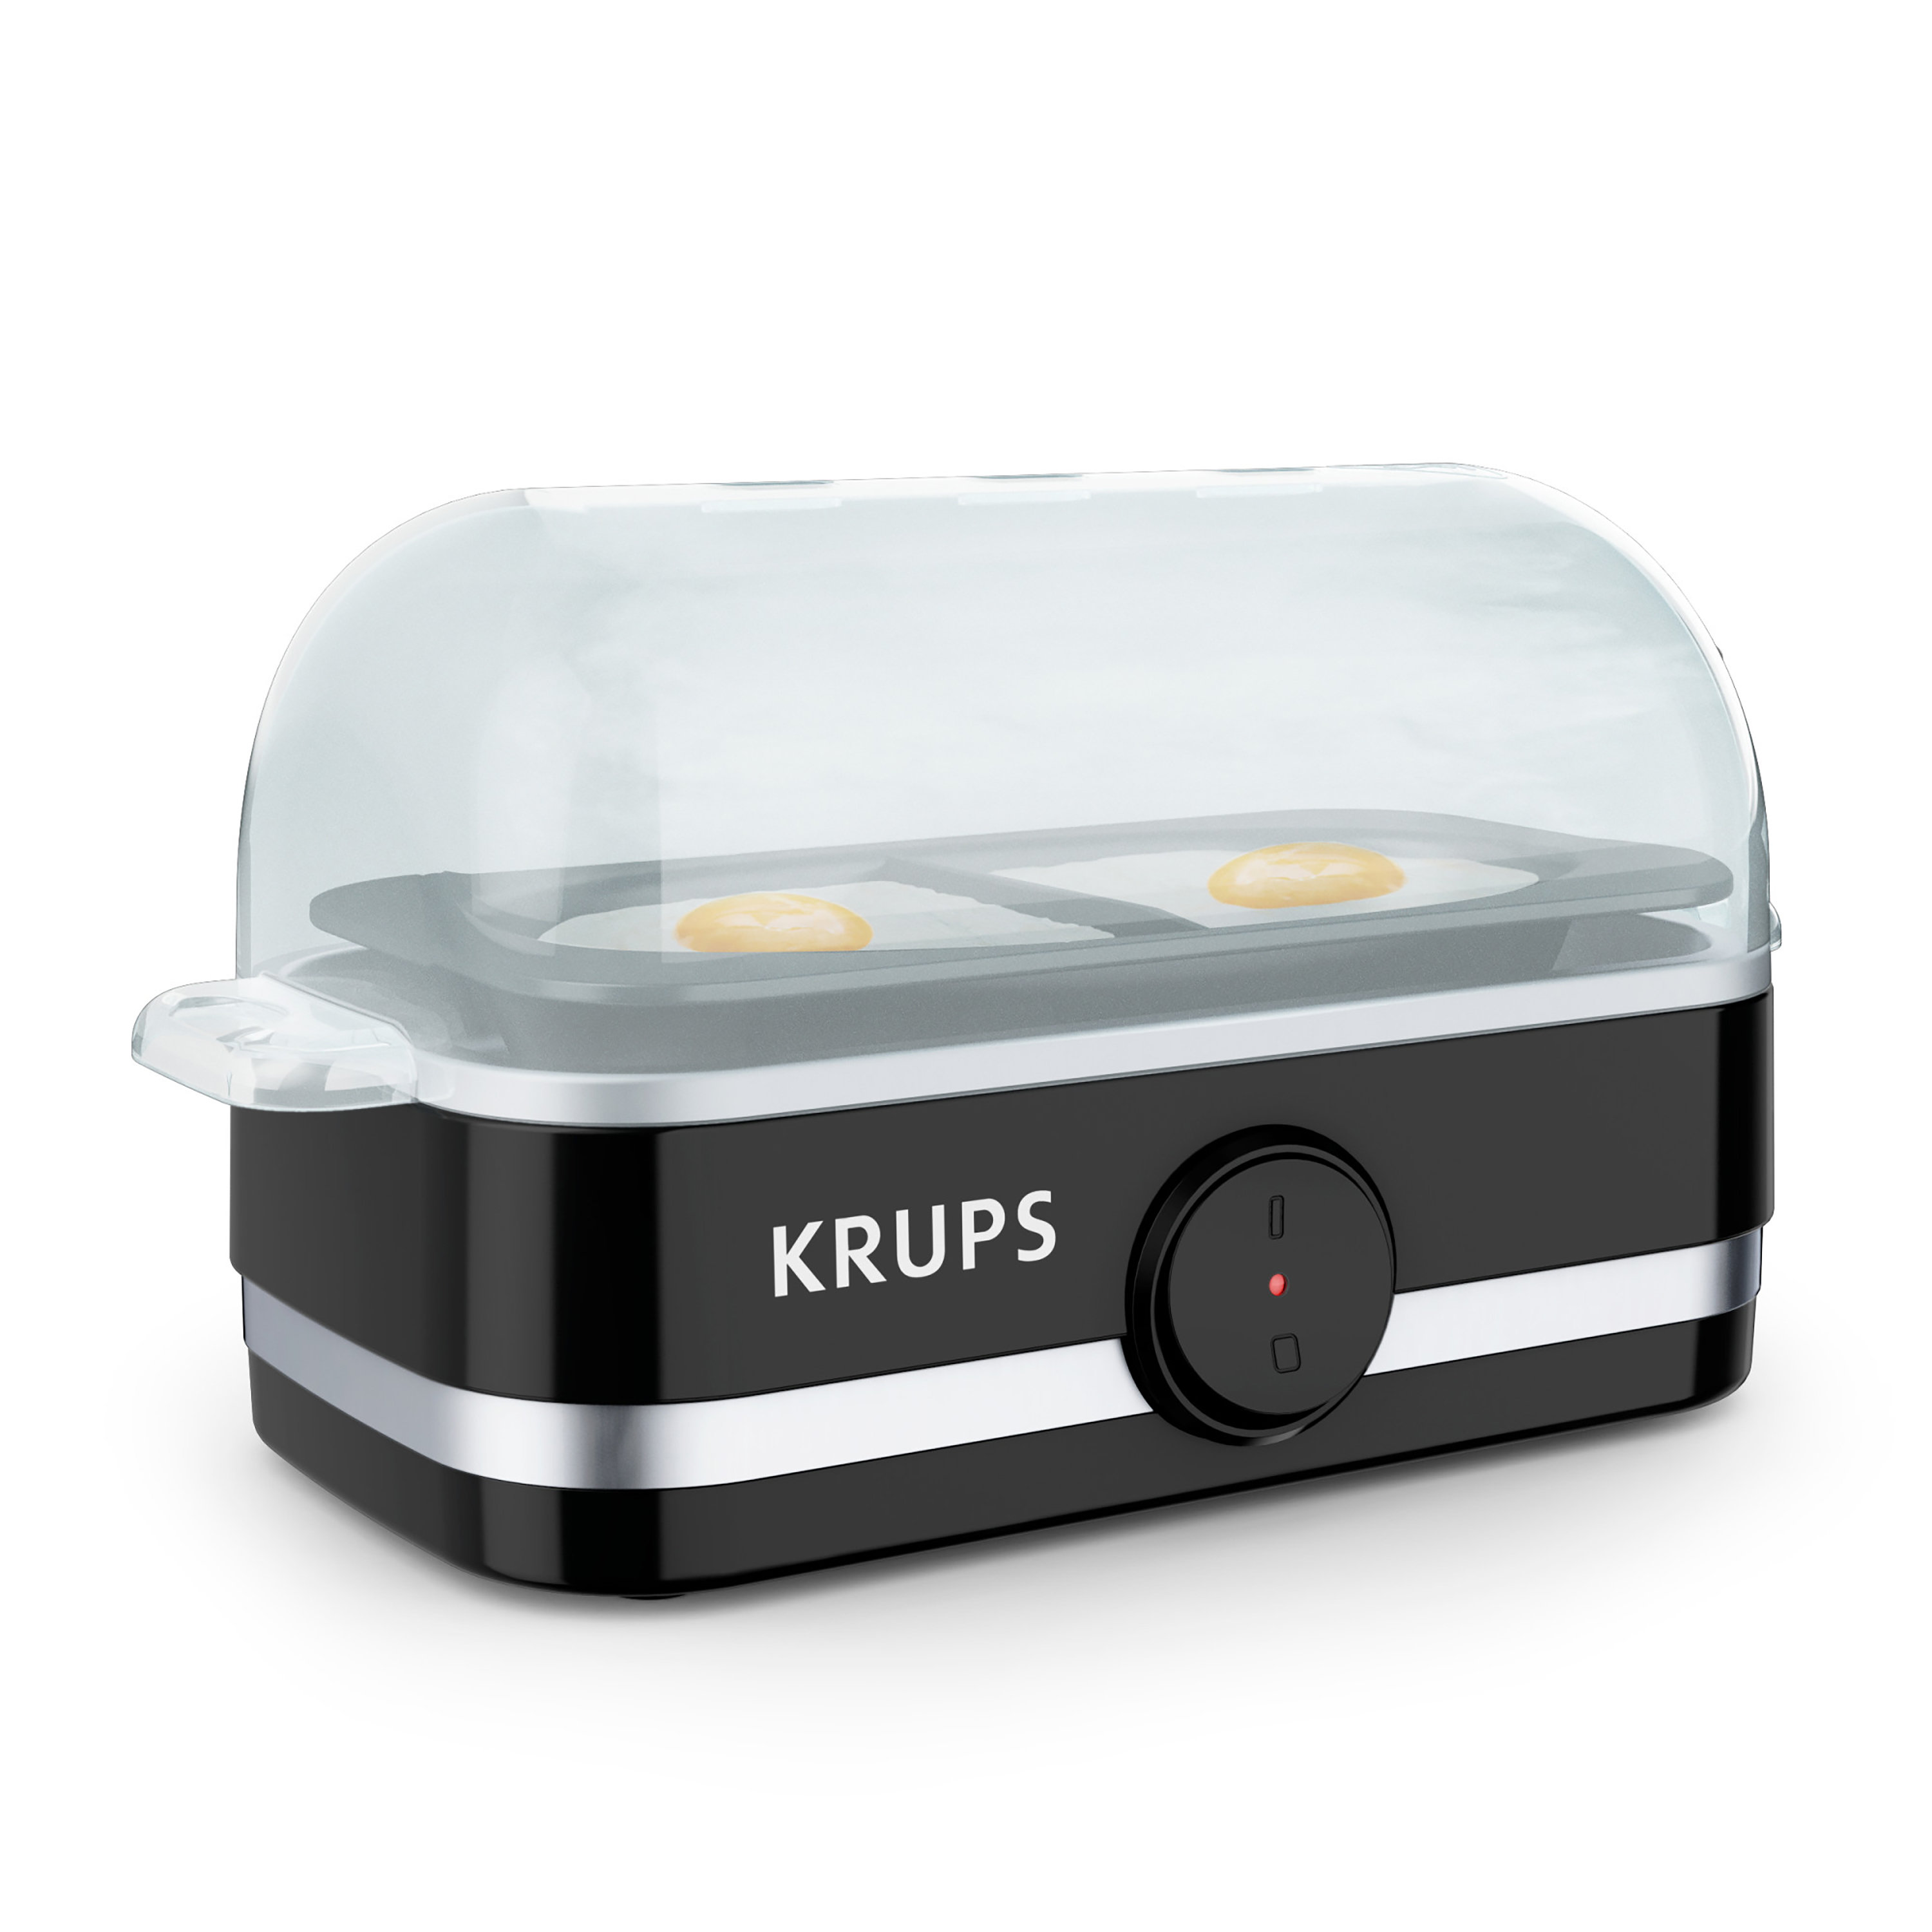 Krups Simply Electric Egg Cooker With Accessories. 6 Egg Capacity